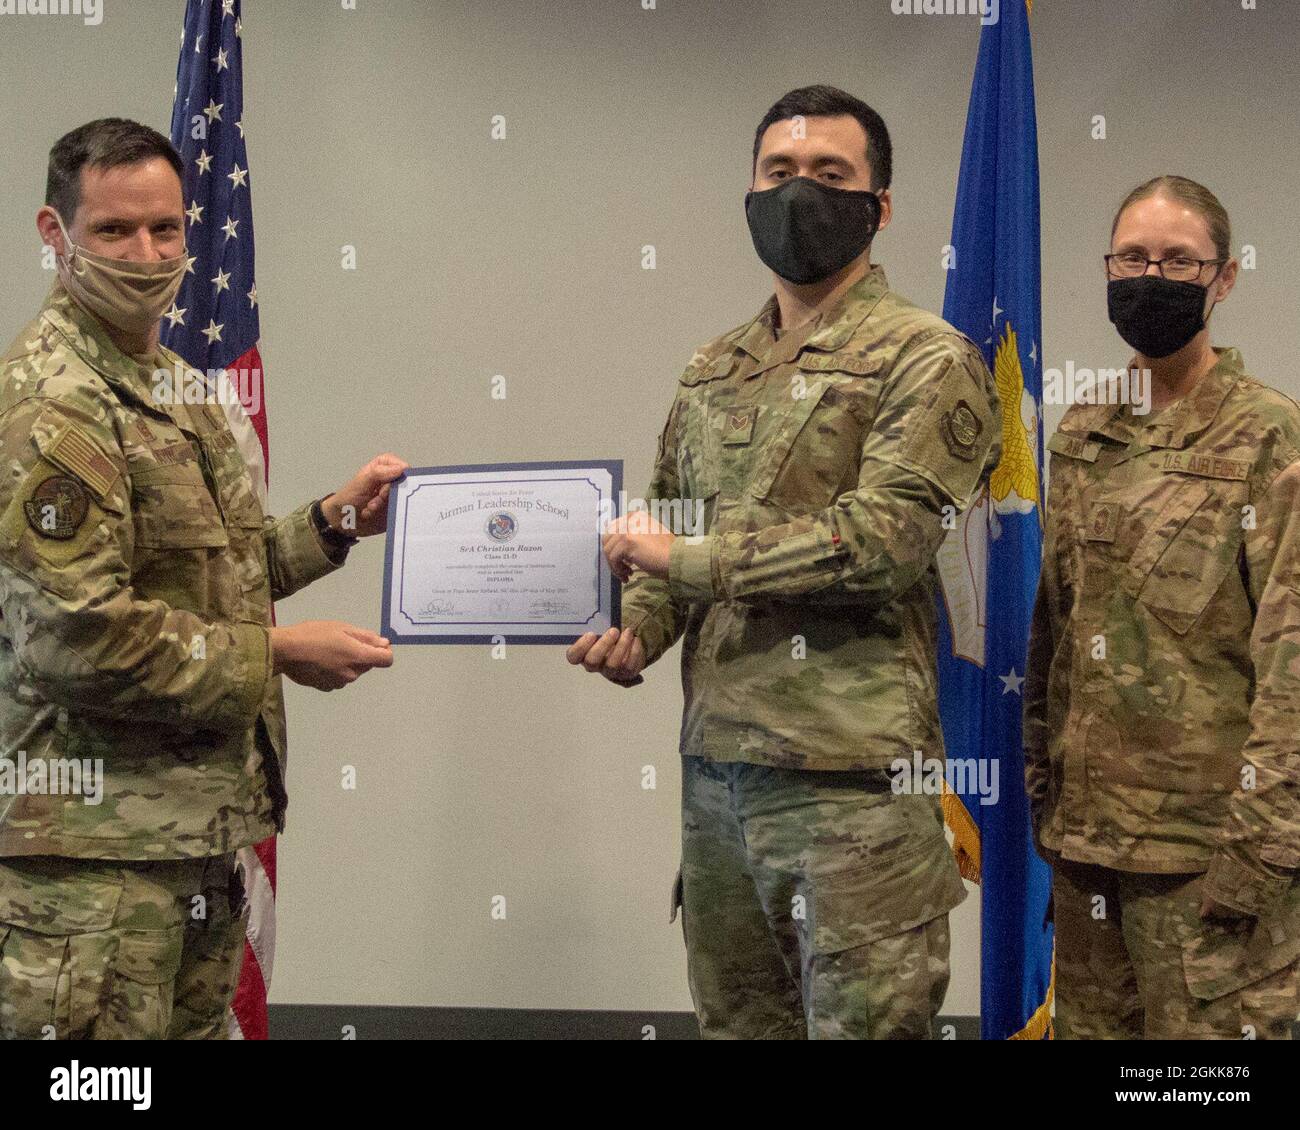 U.S. Air Force Senior Airman Christian Razon, 43rd Air Mobiliity Squadron, receives a graduation certificate from Lt Col. Michael Fazio, 21st Special Tactics Squadron commander, and Chief Master Sgt. Mariah Armga, 43 AMOG superintedent. The presentation was part of the graduation ceremony for Class 21-D of the Chief Master Sgt. Louis Williams Airman Leadership School at Pope Army Airfield, North Carolina, May 13, 2021. Stock Photo